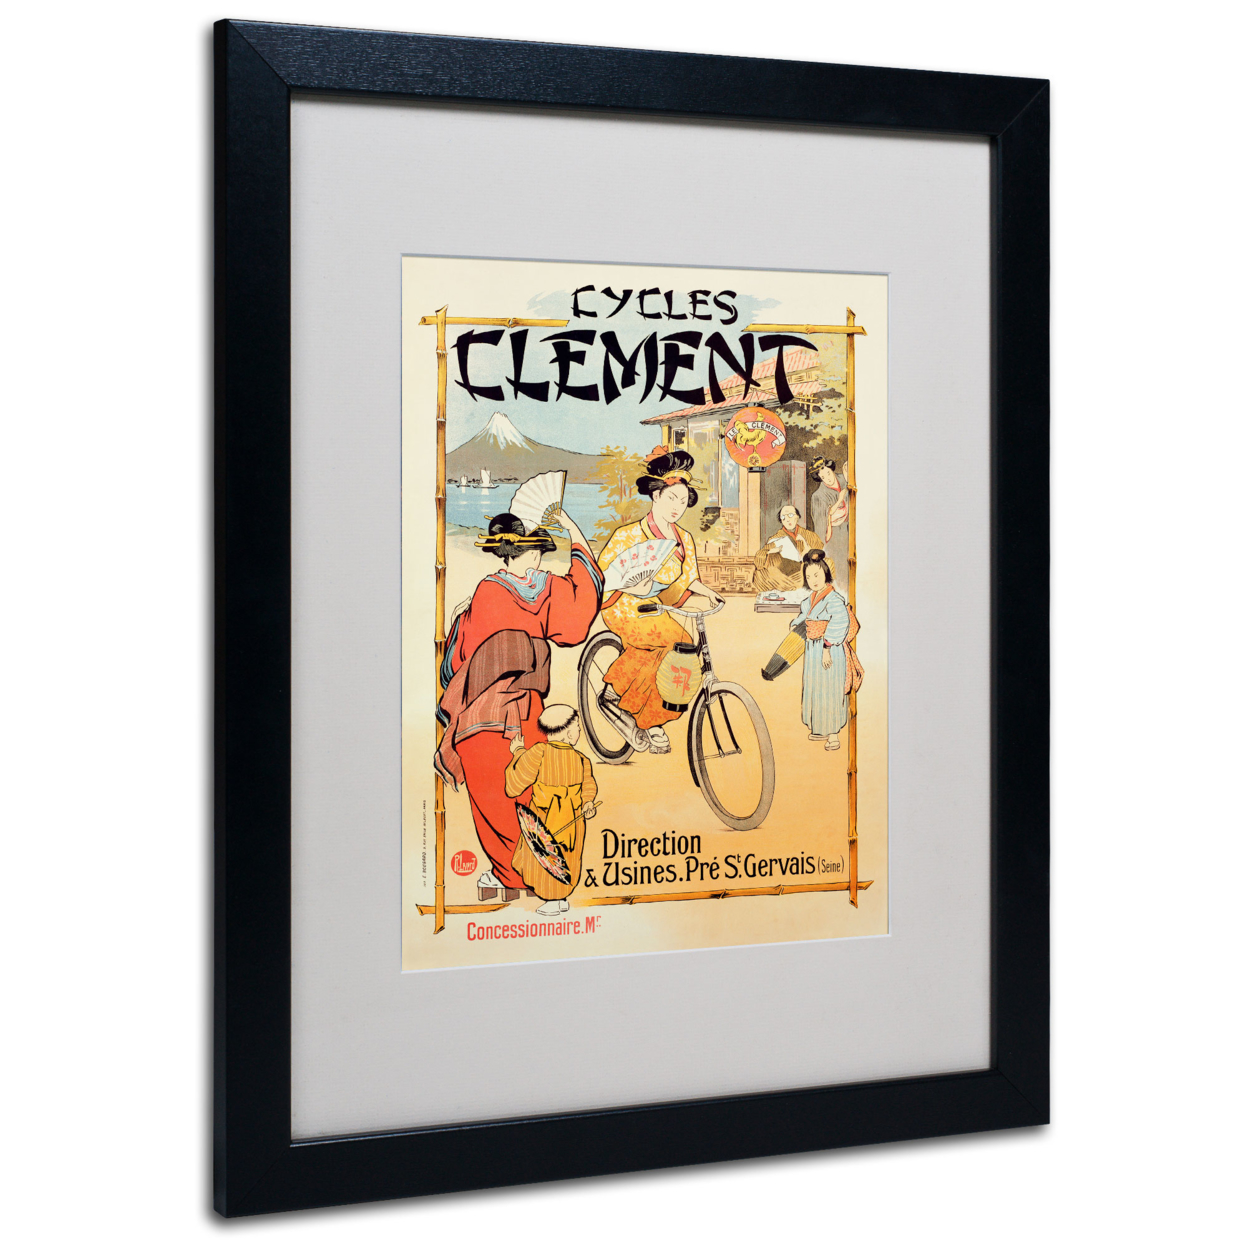 Cycles Clement' Black Wooden Framed Art 18 X 22 Inches